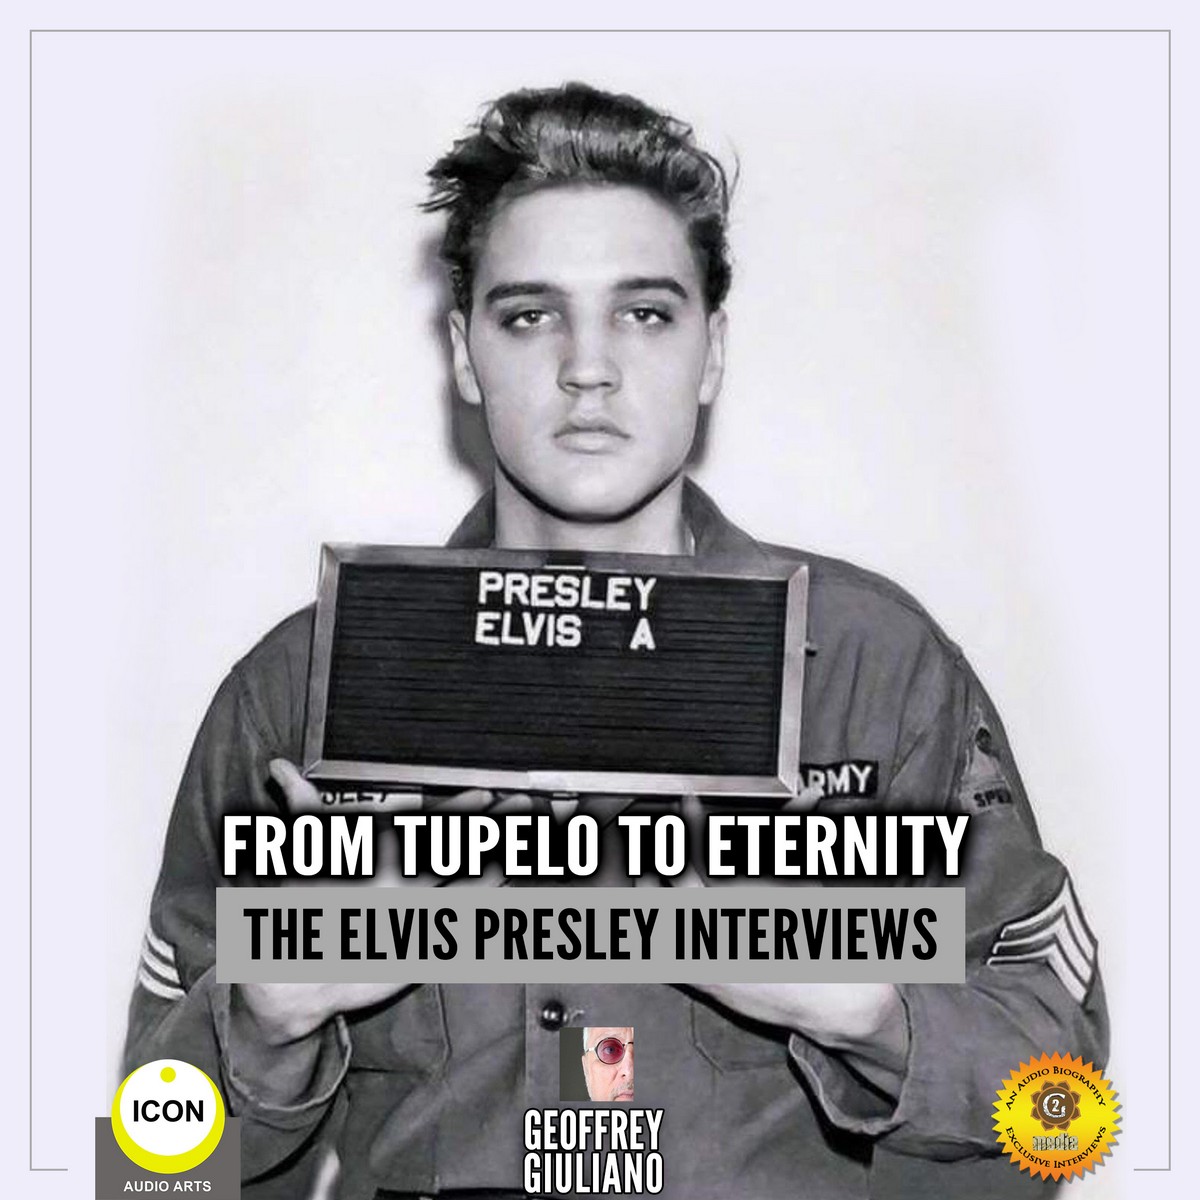 From Tupelo to Eternity – The Elvis Presley Interviews